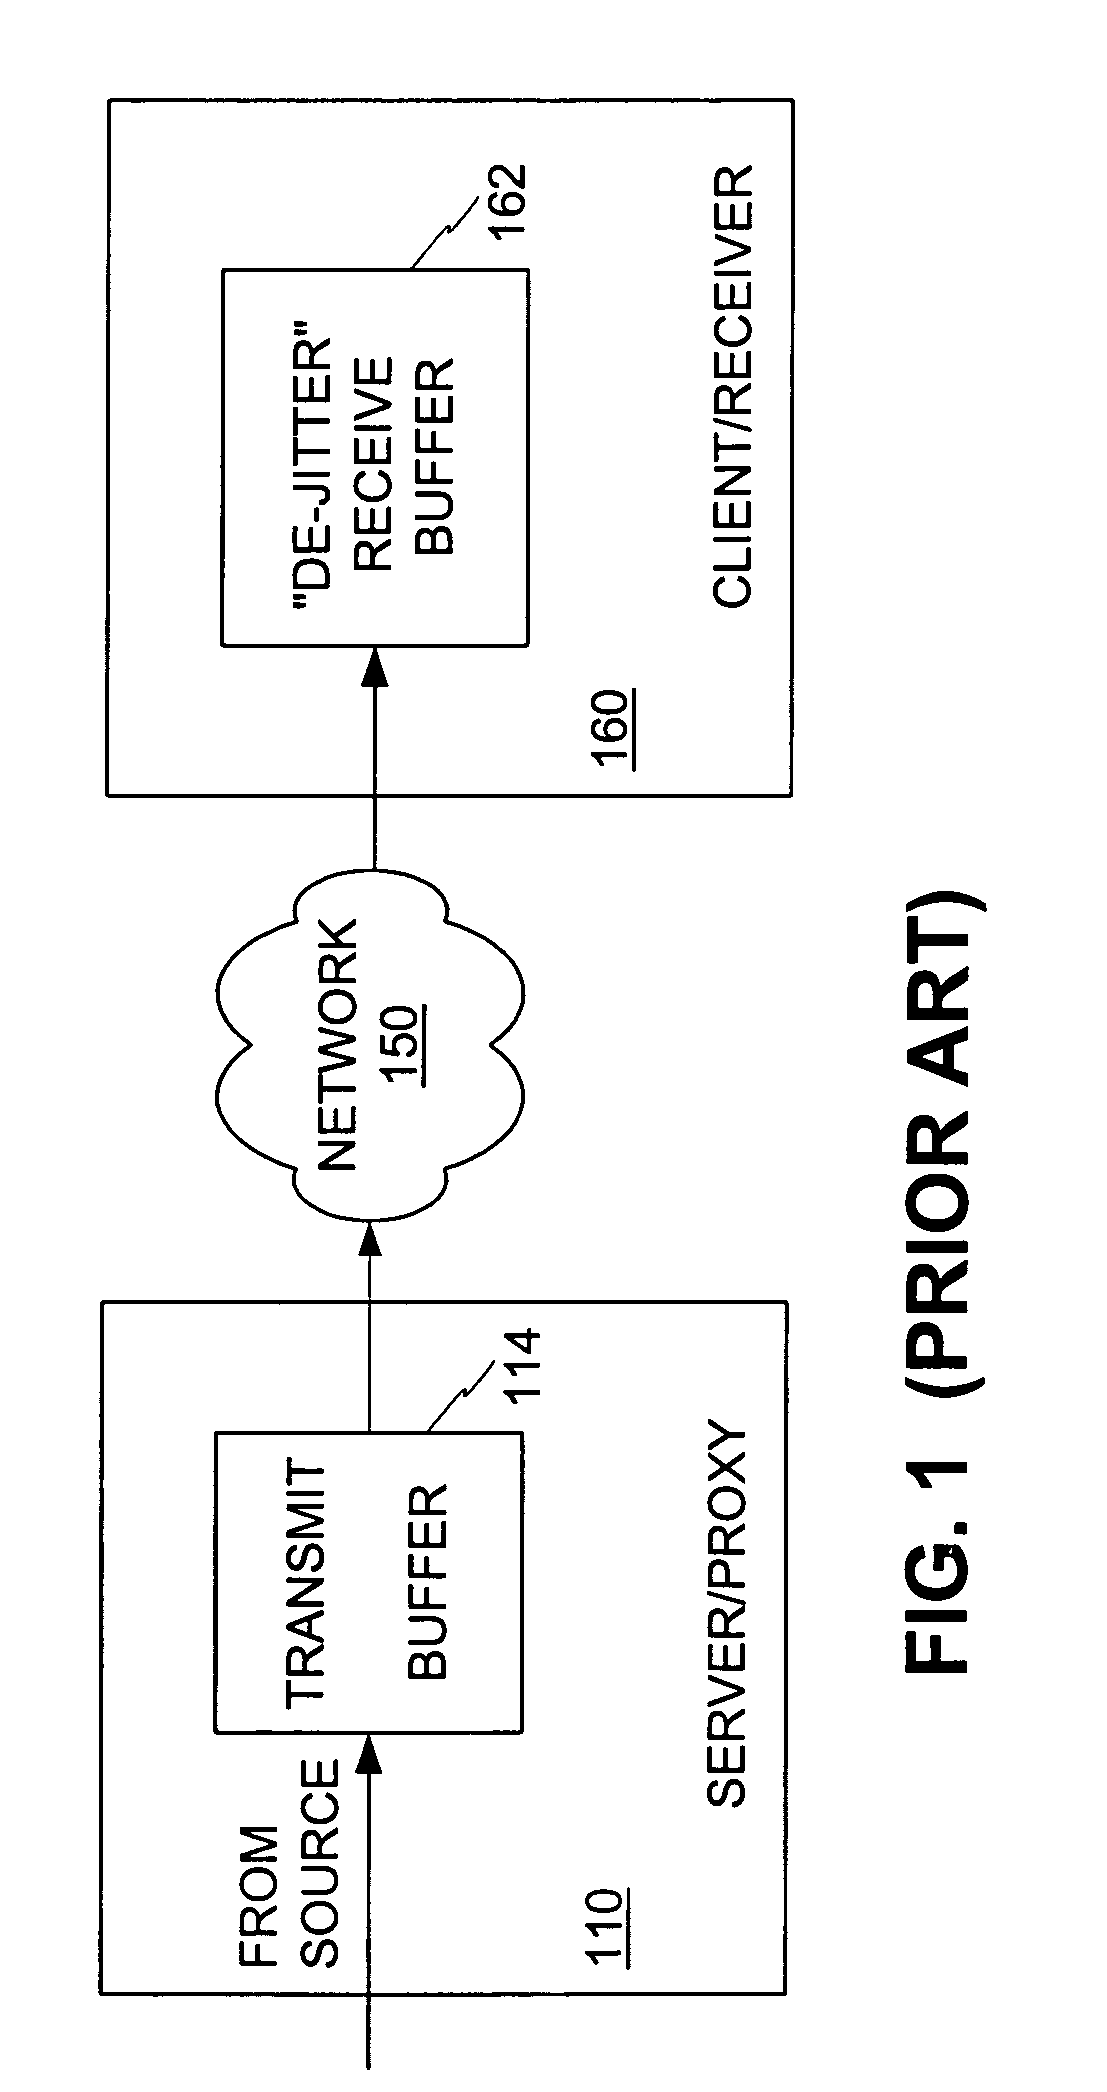 Server and method for transmitting streaming media to client through a congested network